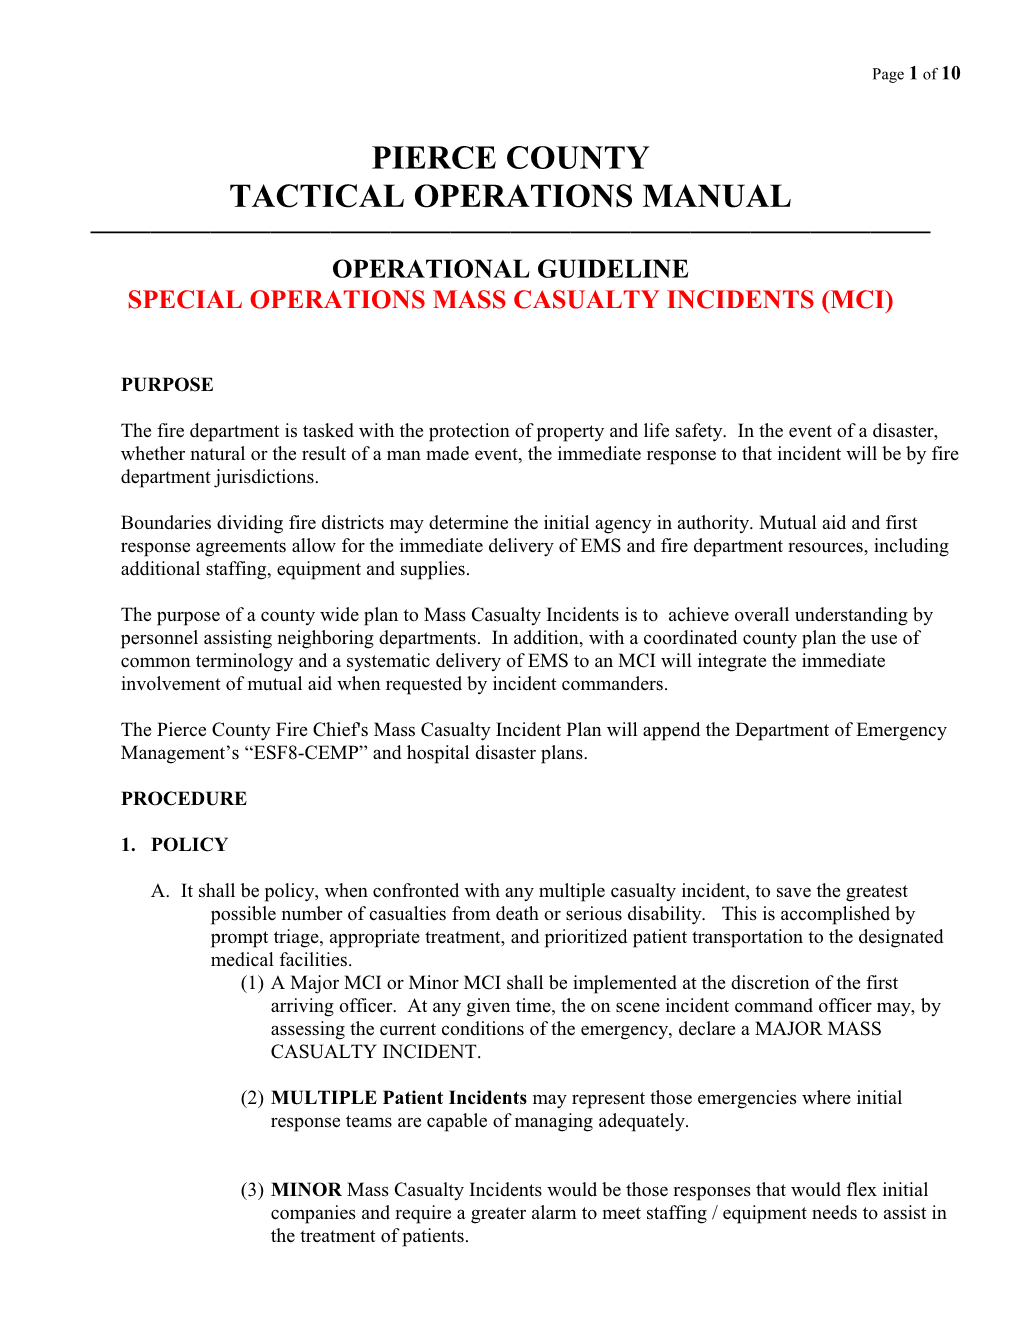 Incident Management System and Tactical Operation Manual